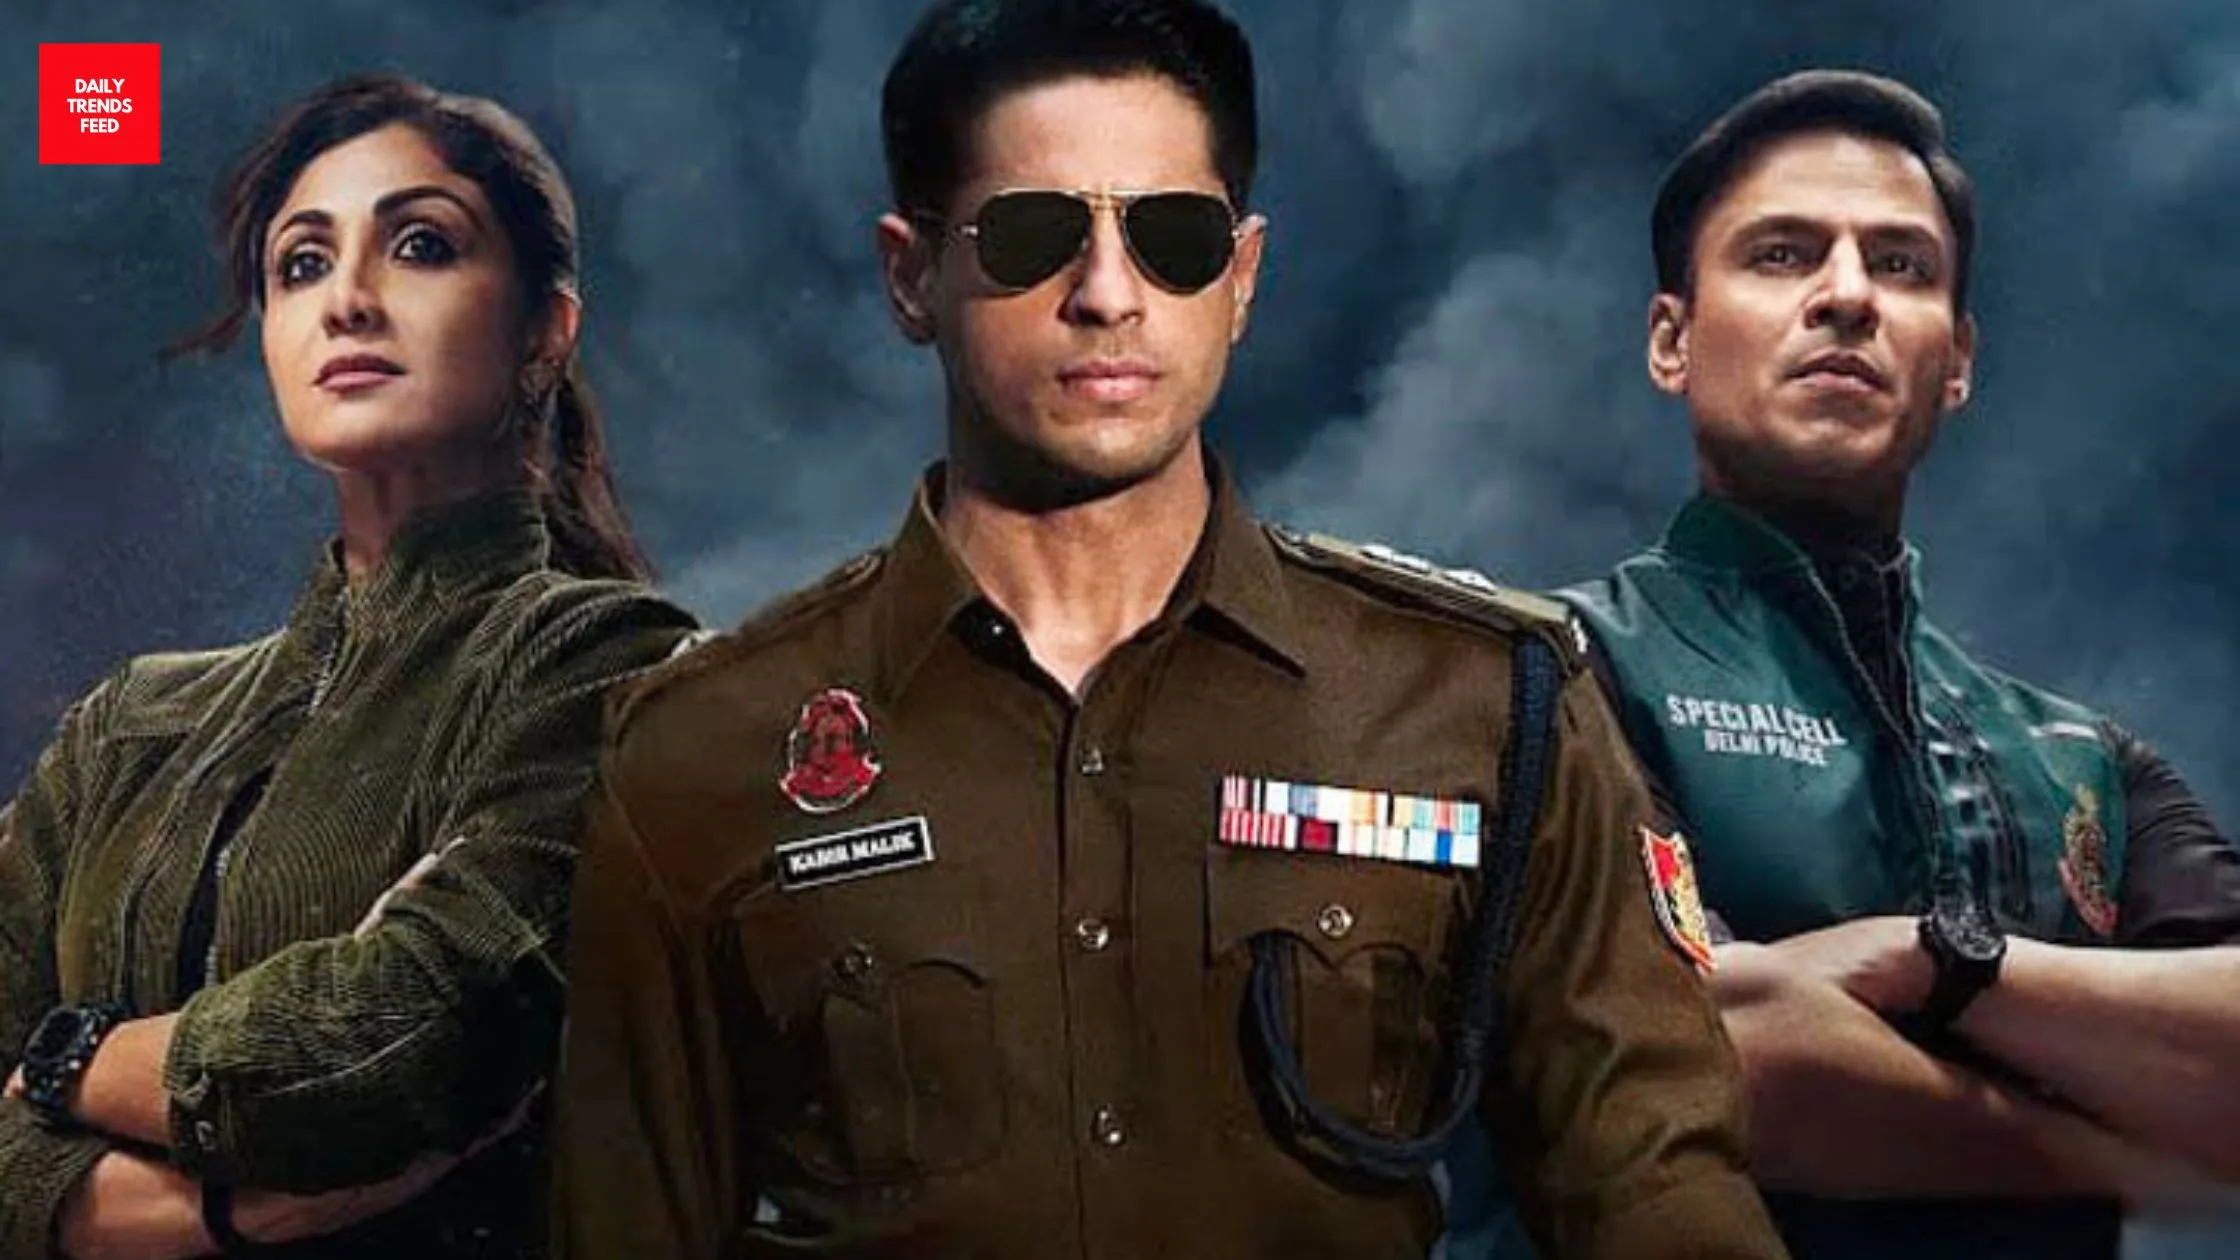 Indian Police Force Twitter Review: Regular Story, But Great Action In Sidharth Malhotra's Cop Show!